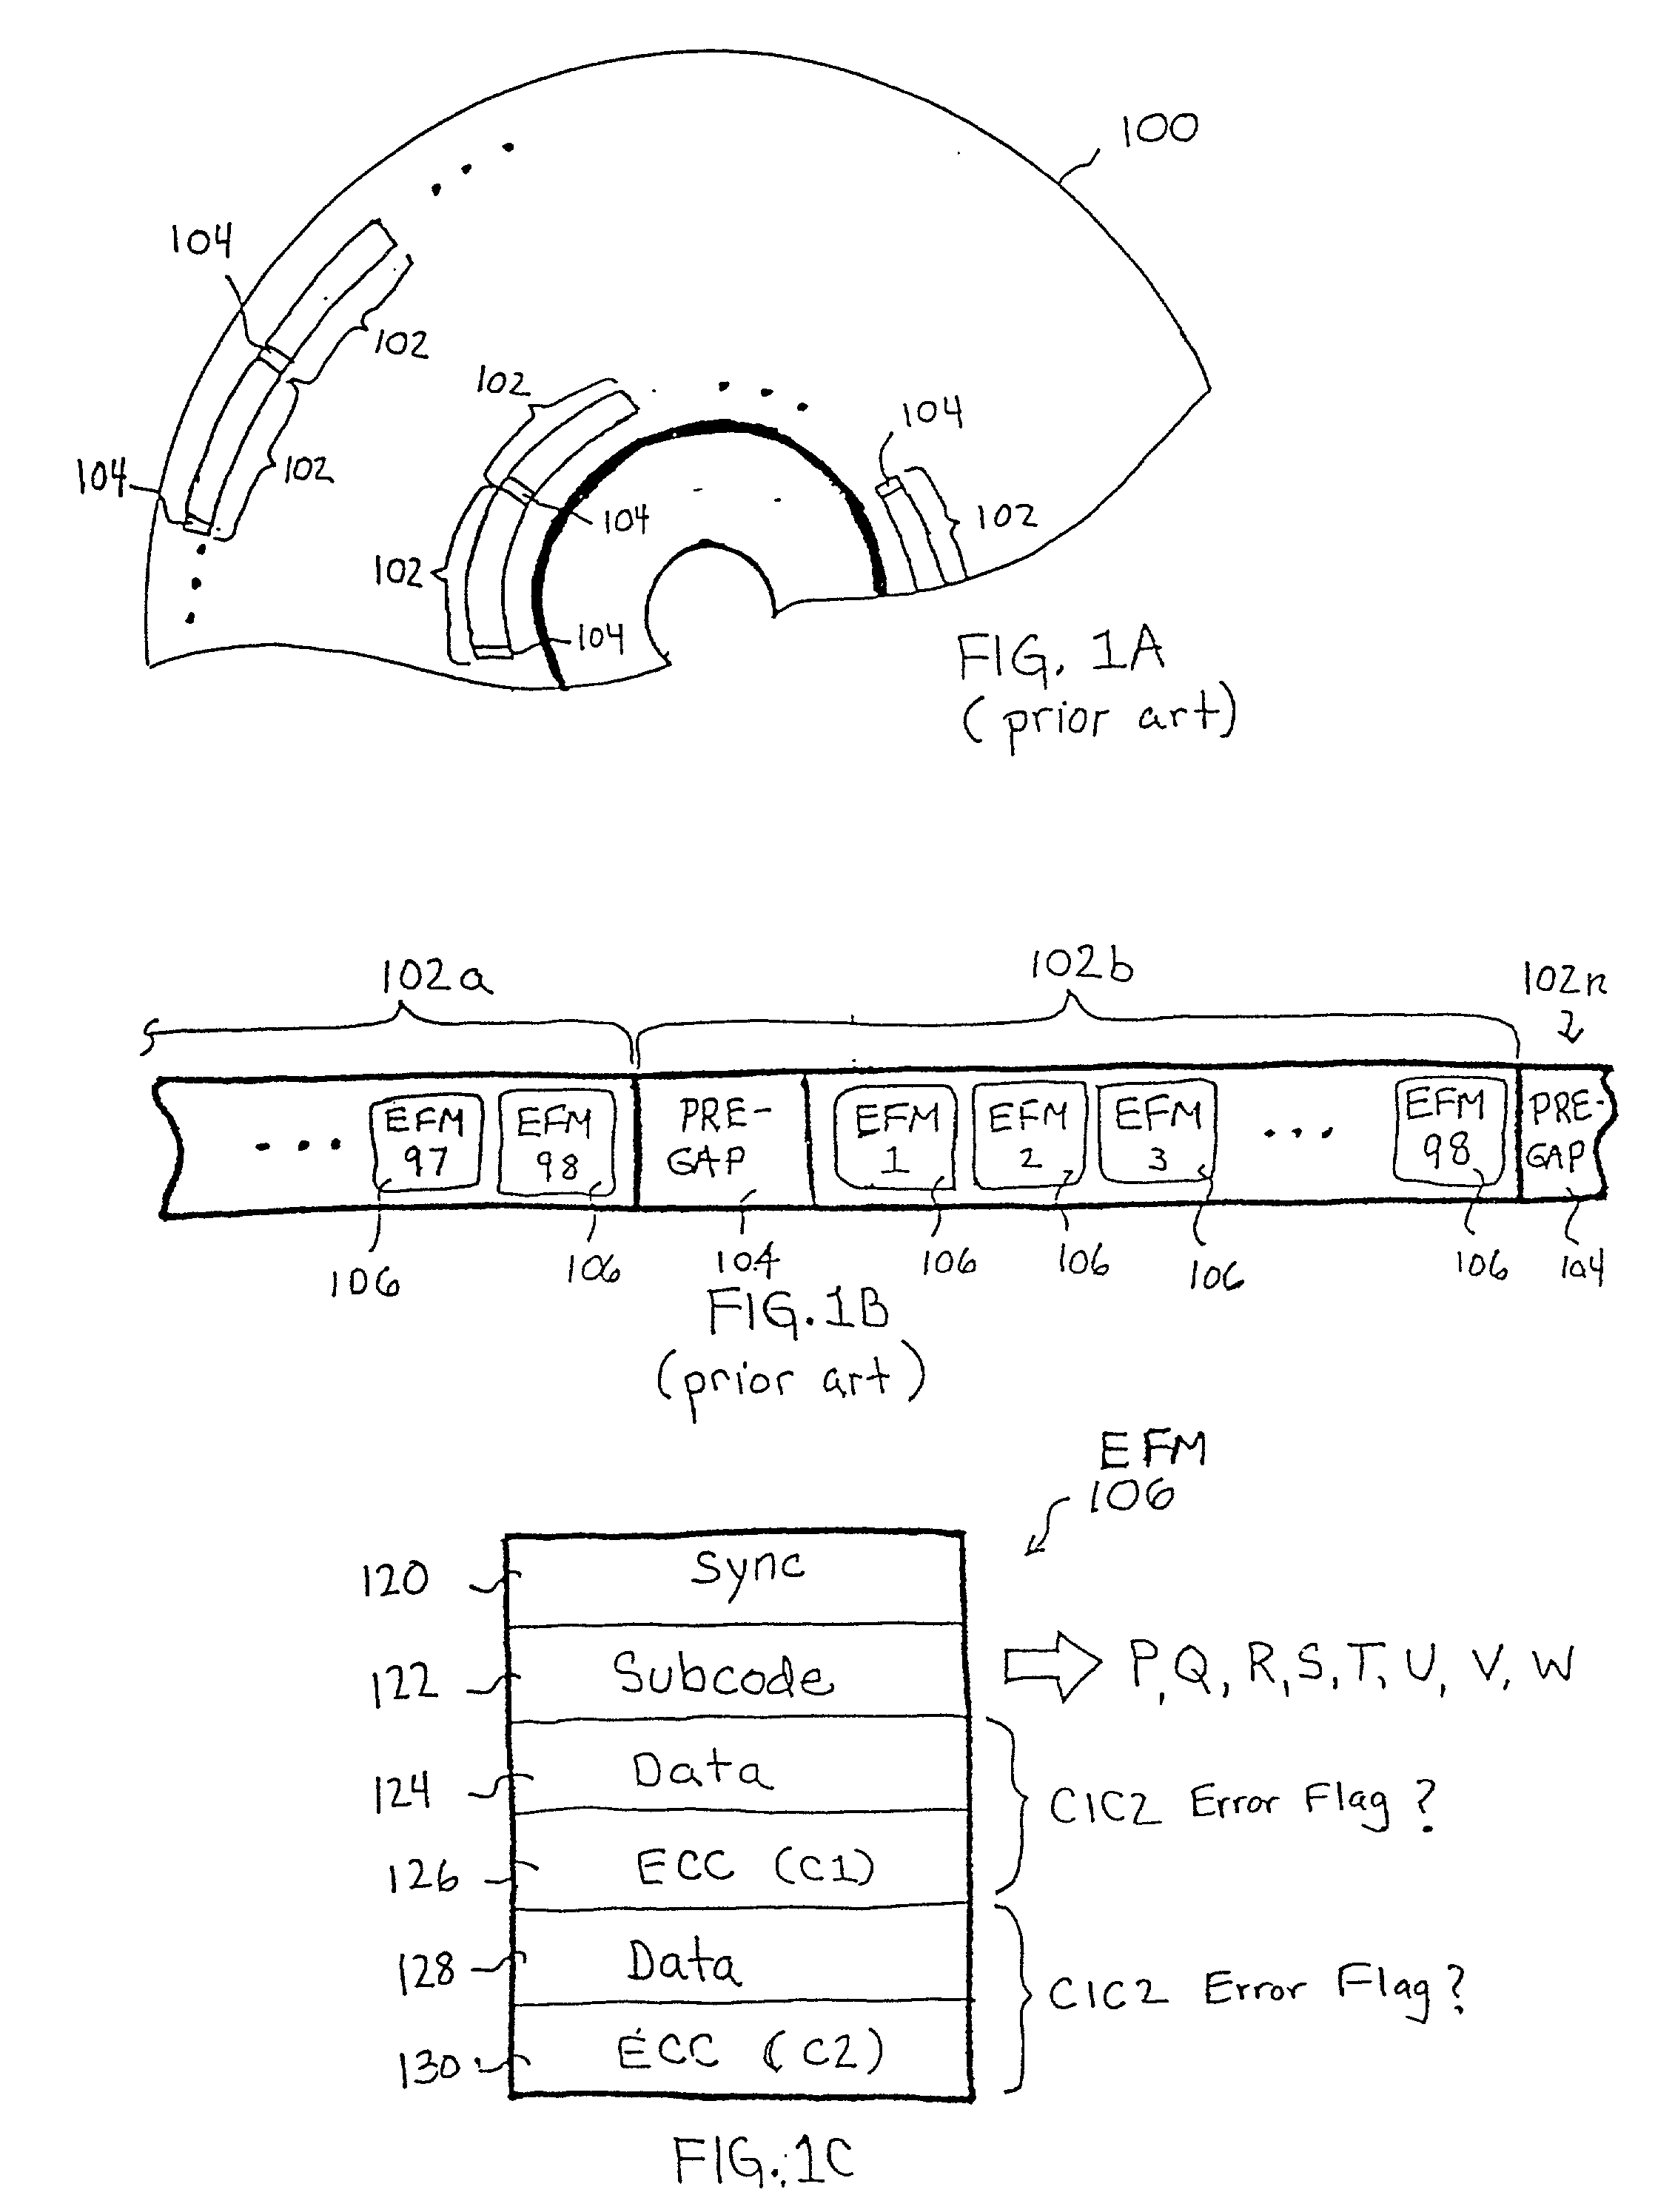 Methods and apparatus for delayed block release in compact disc systems